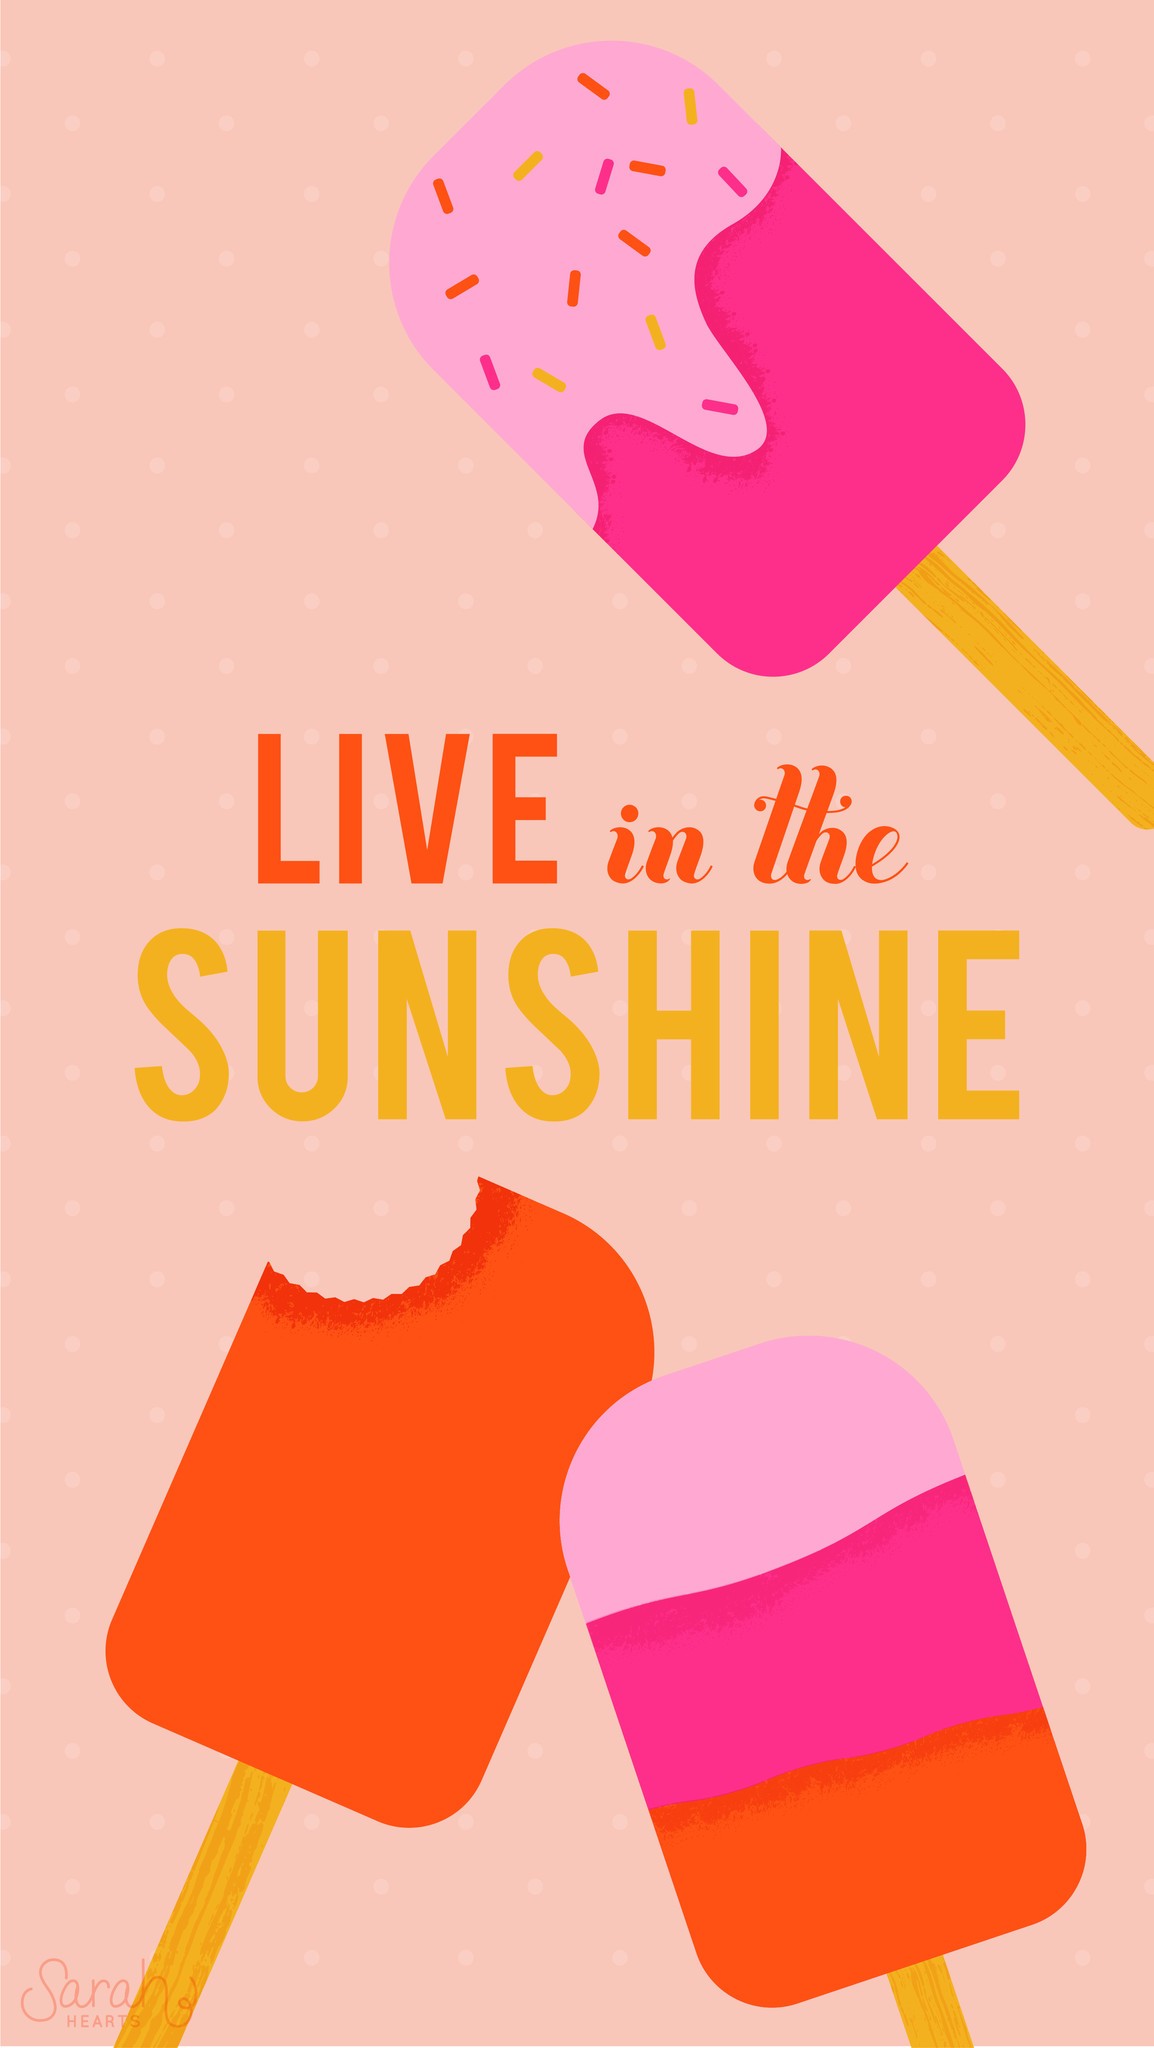 Live in the sunshine